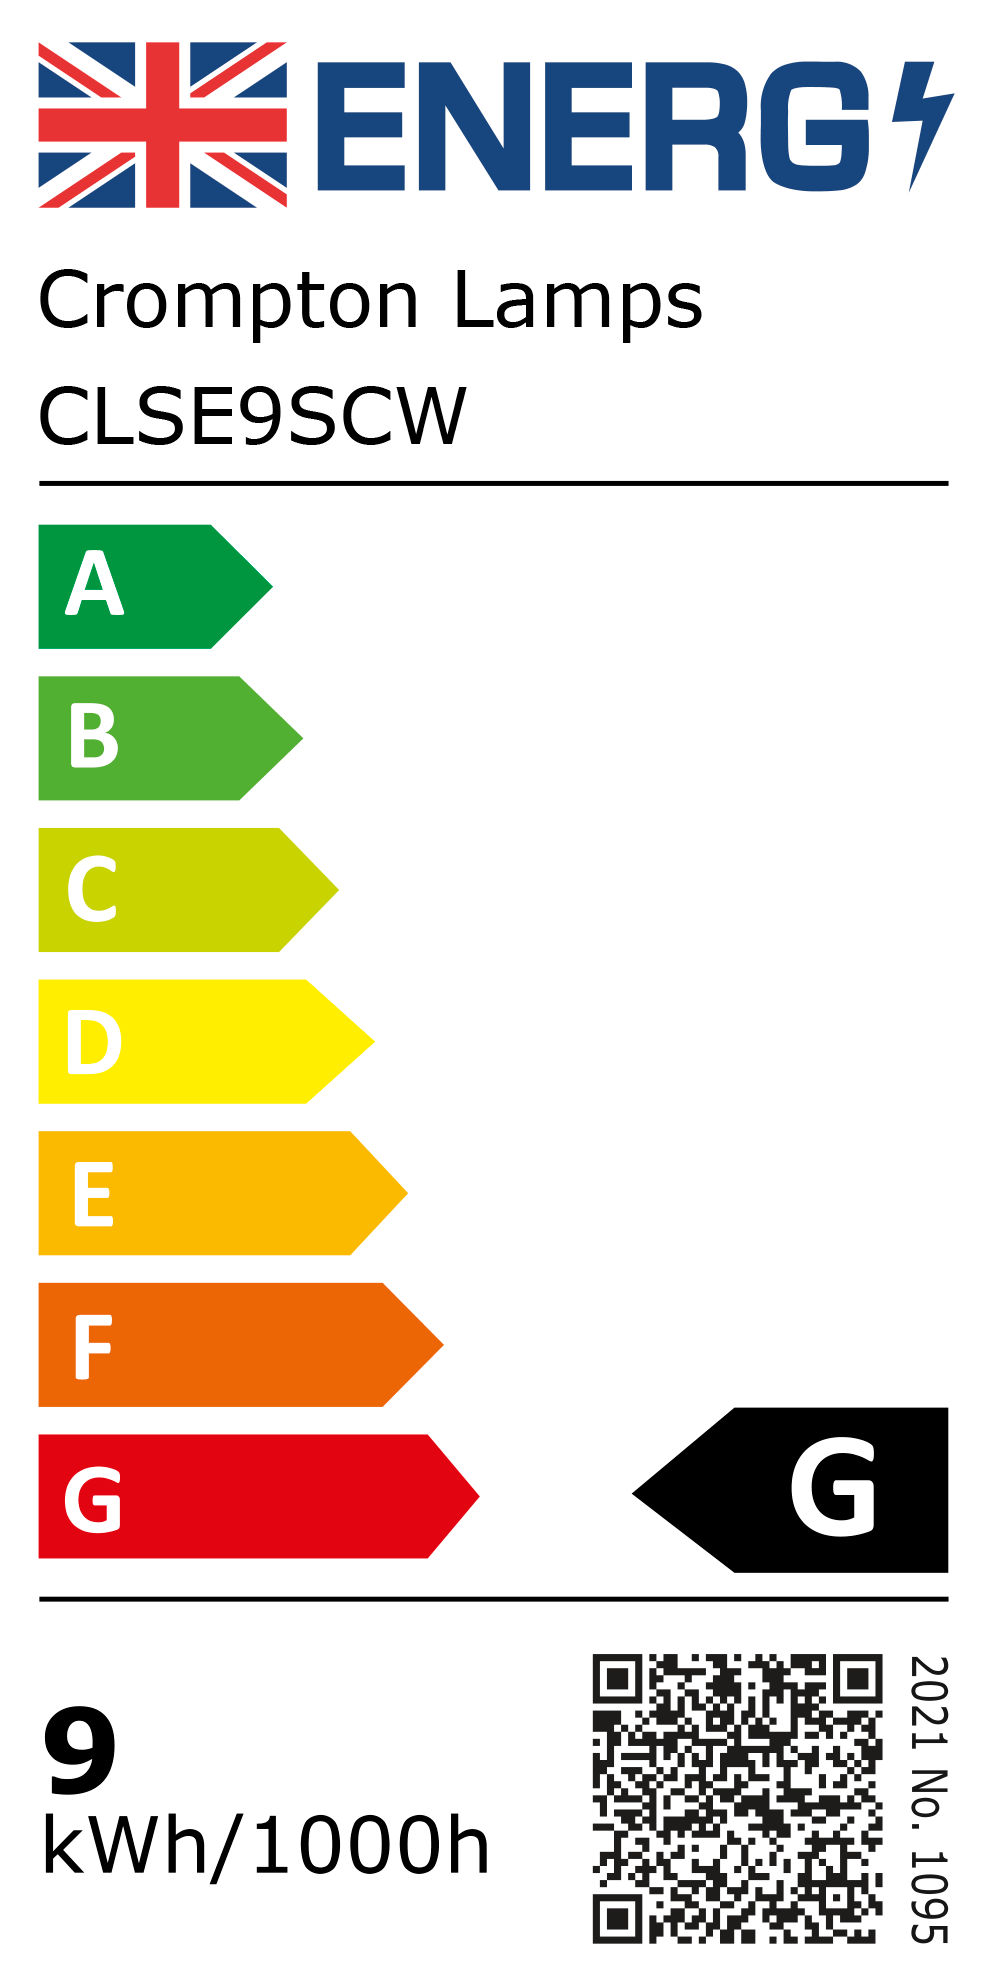 New 2021 Energy Rating Label: Stock Code CLSE9SCW